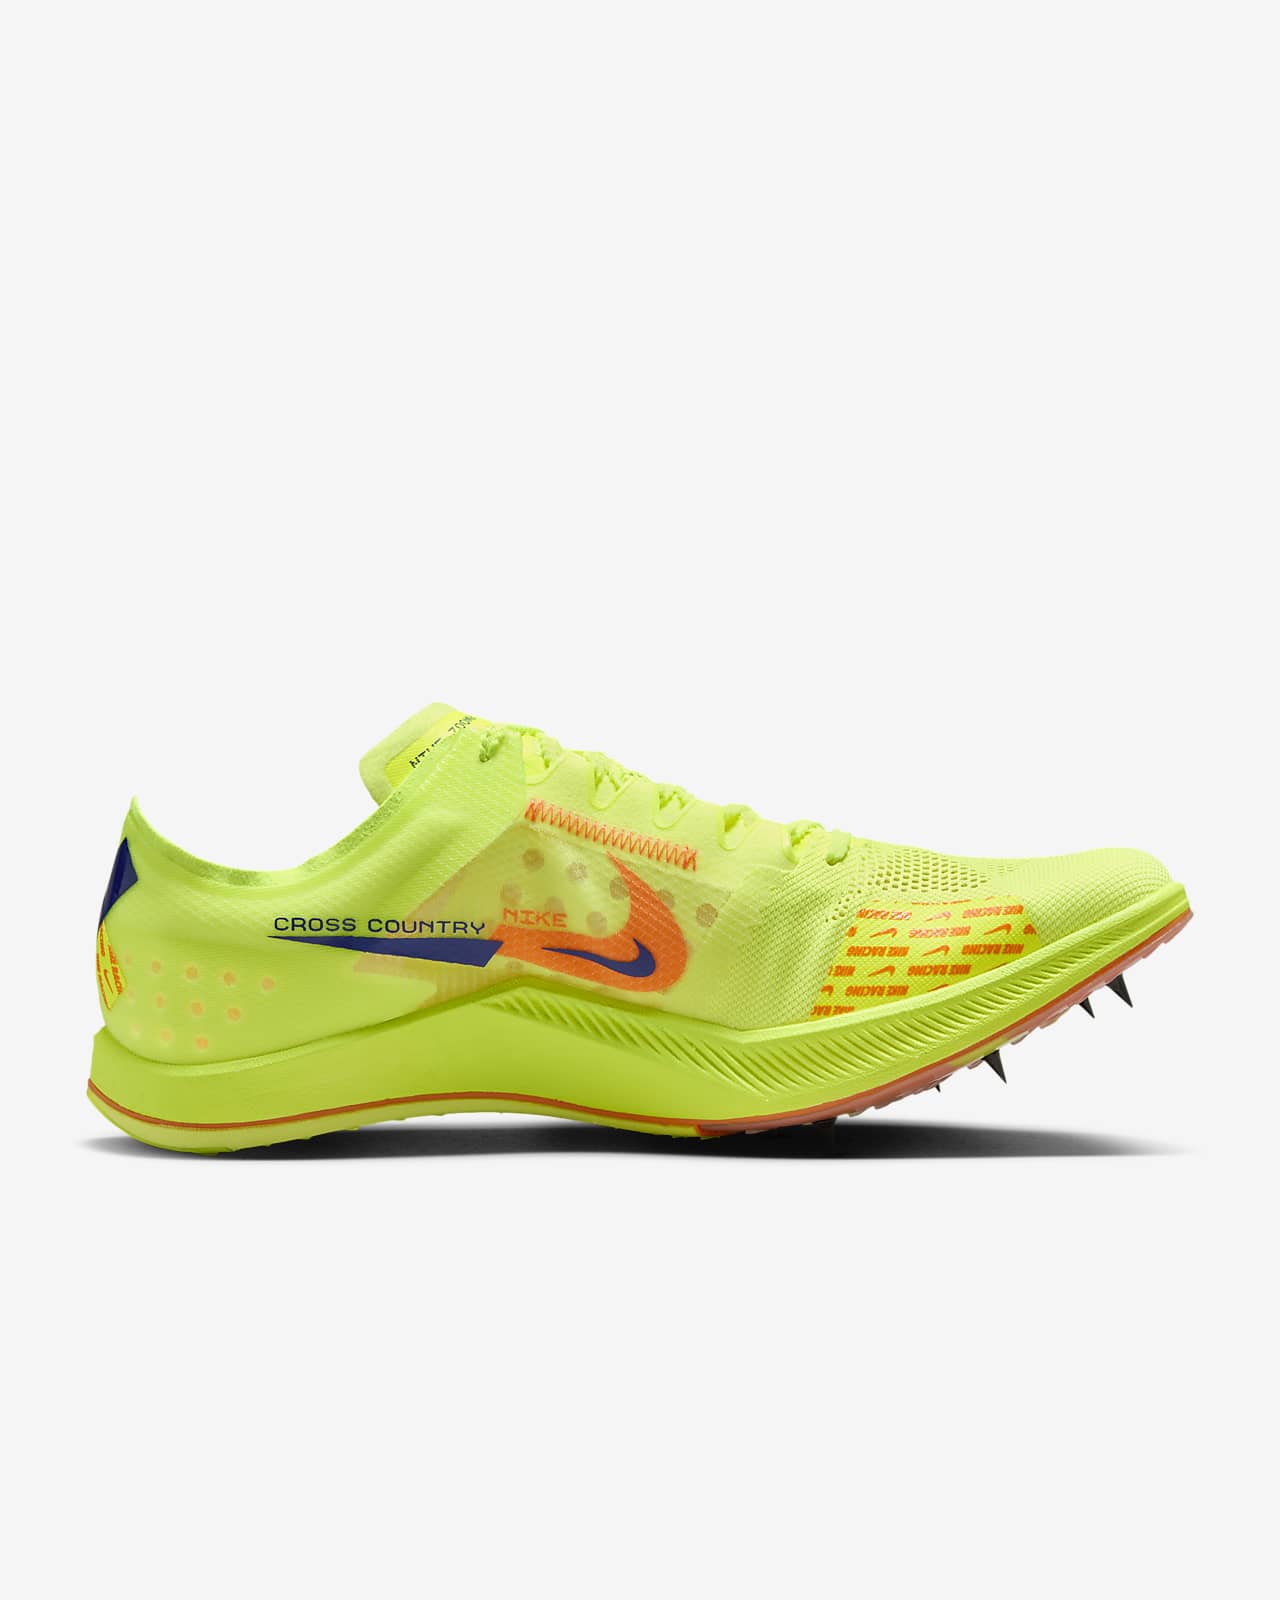 Nike ZoomX Dragonfly XC Cross-Country Spikes